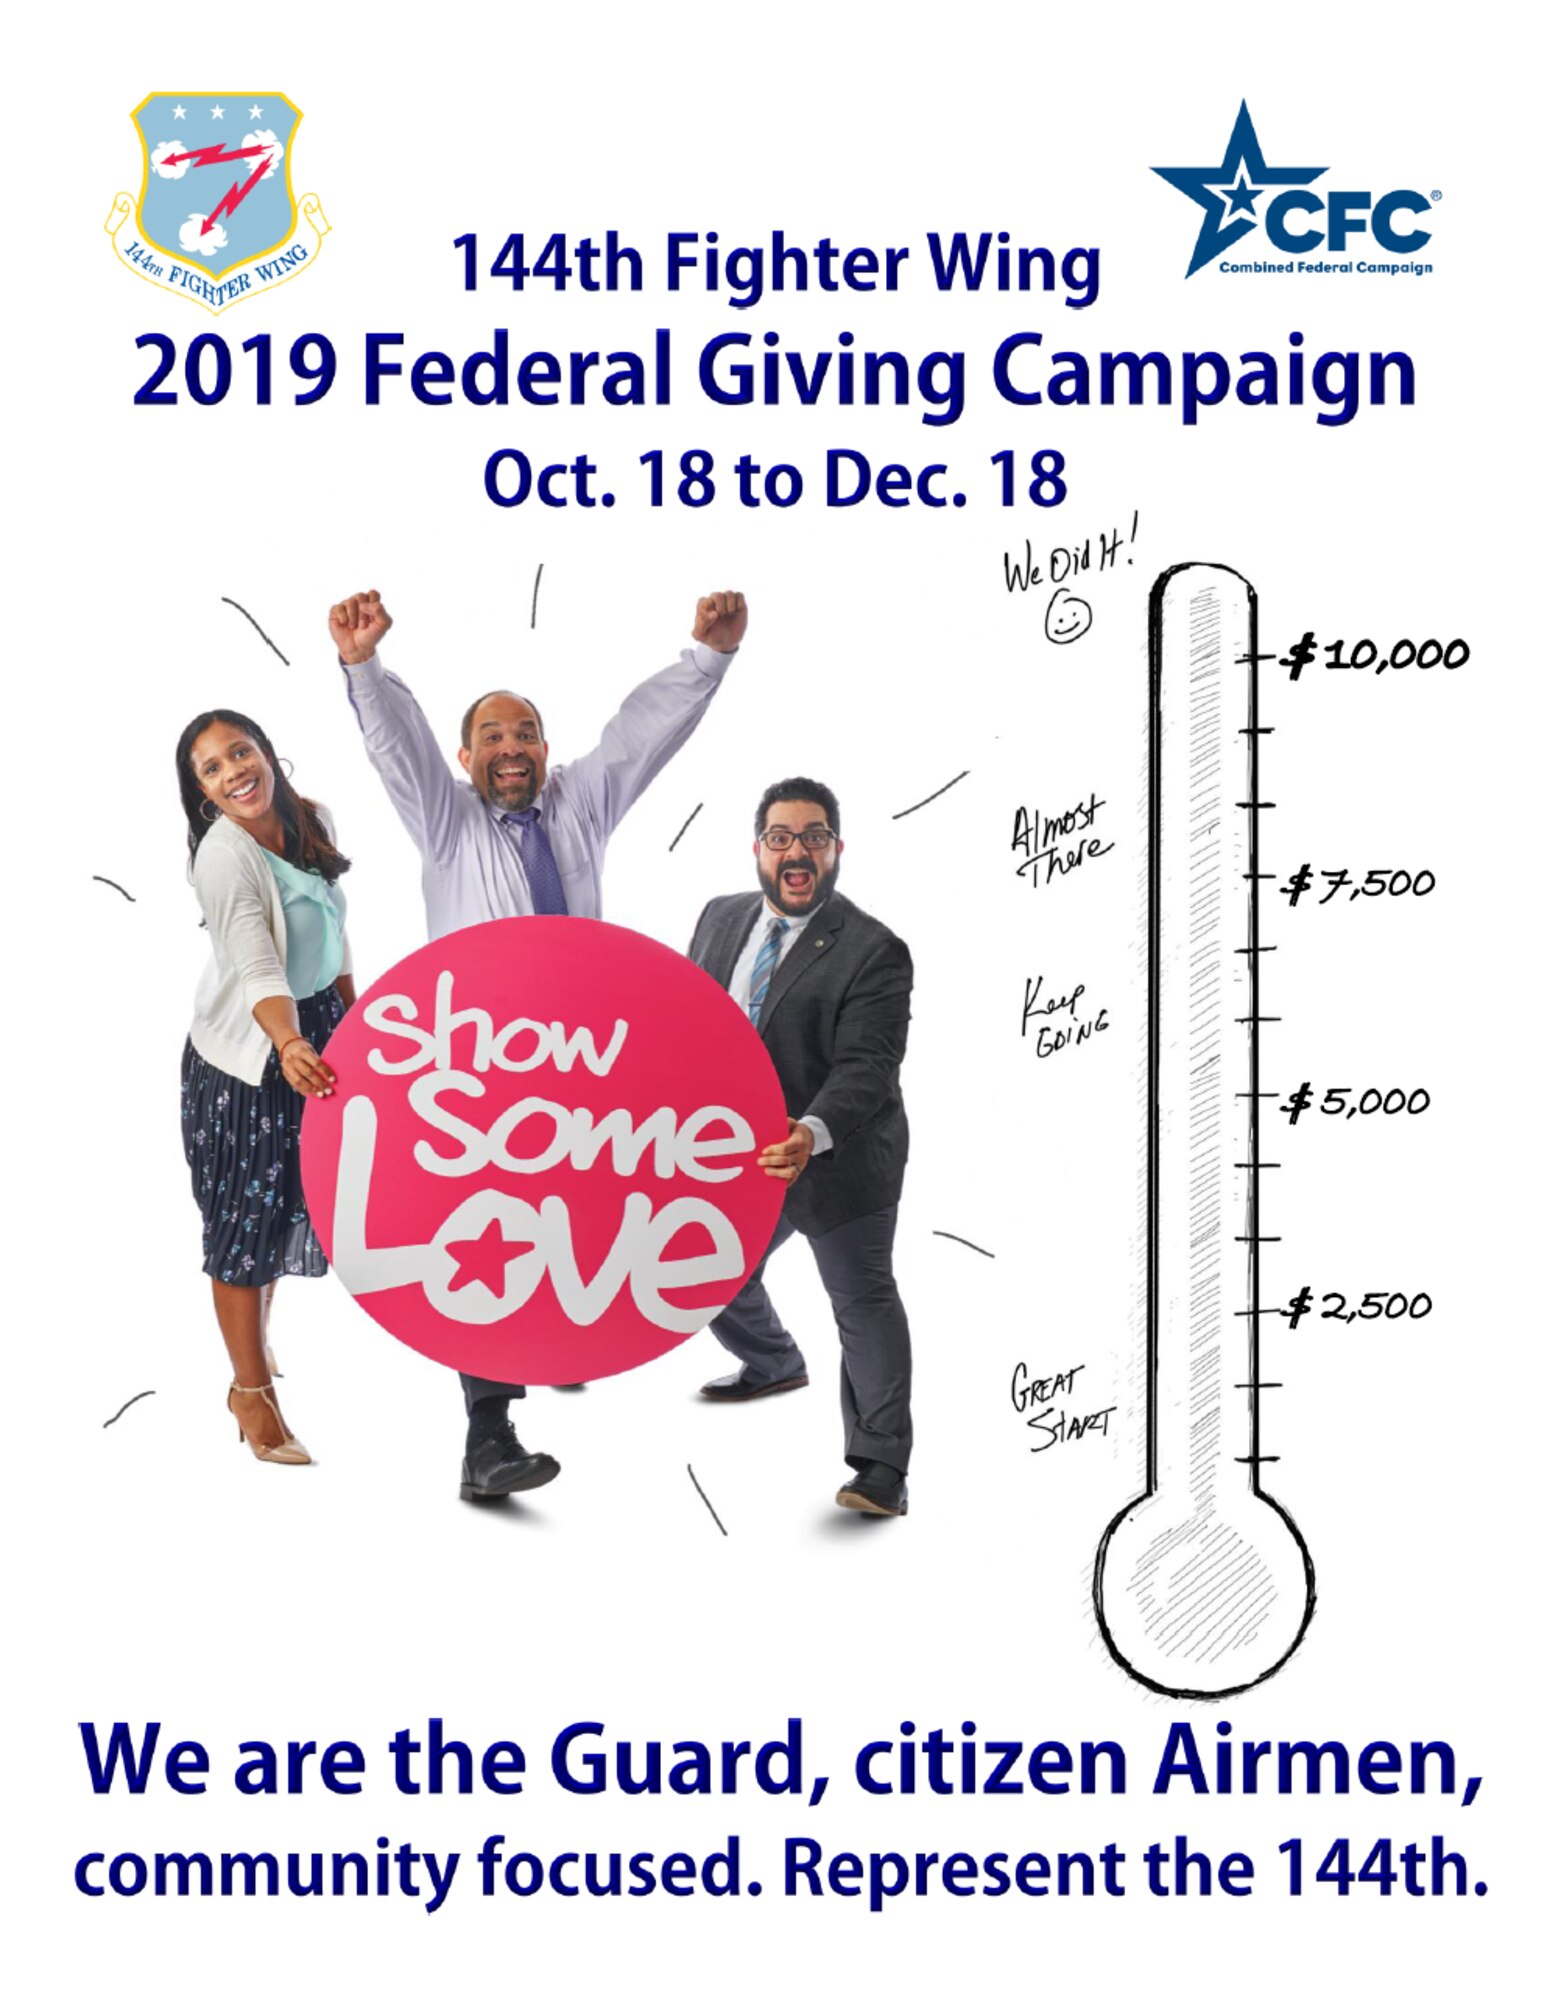 The 144th Fighter Wing hosted its annual Federal Giving Campaign Oct. 18, 2019 - Jan. 12, 2020, surpassing its fundraising goals.